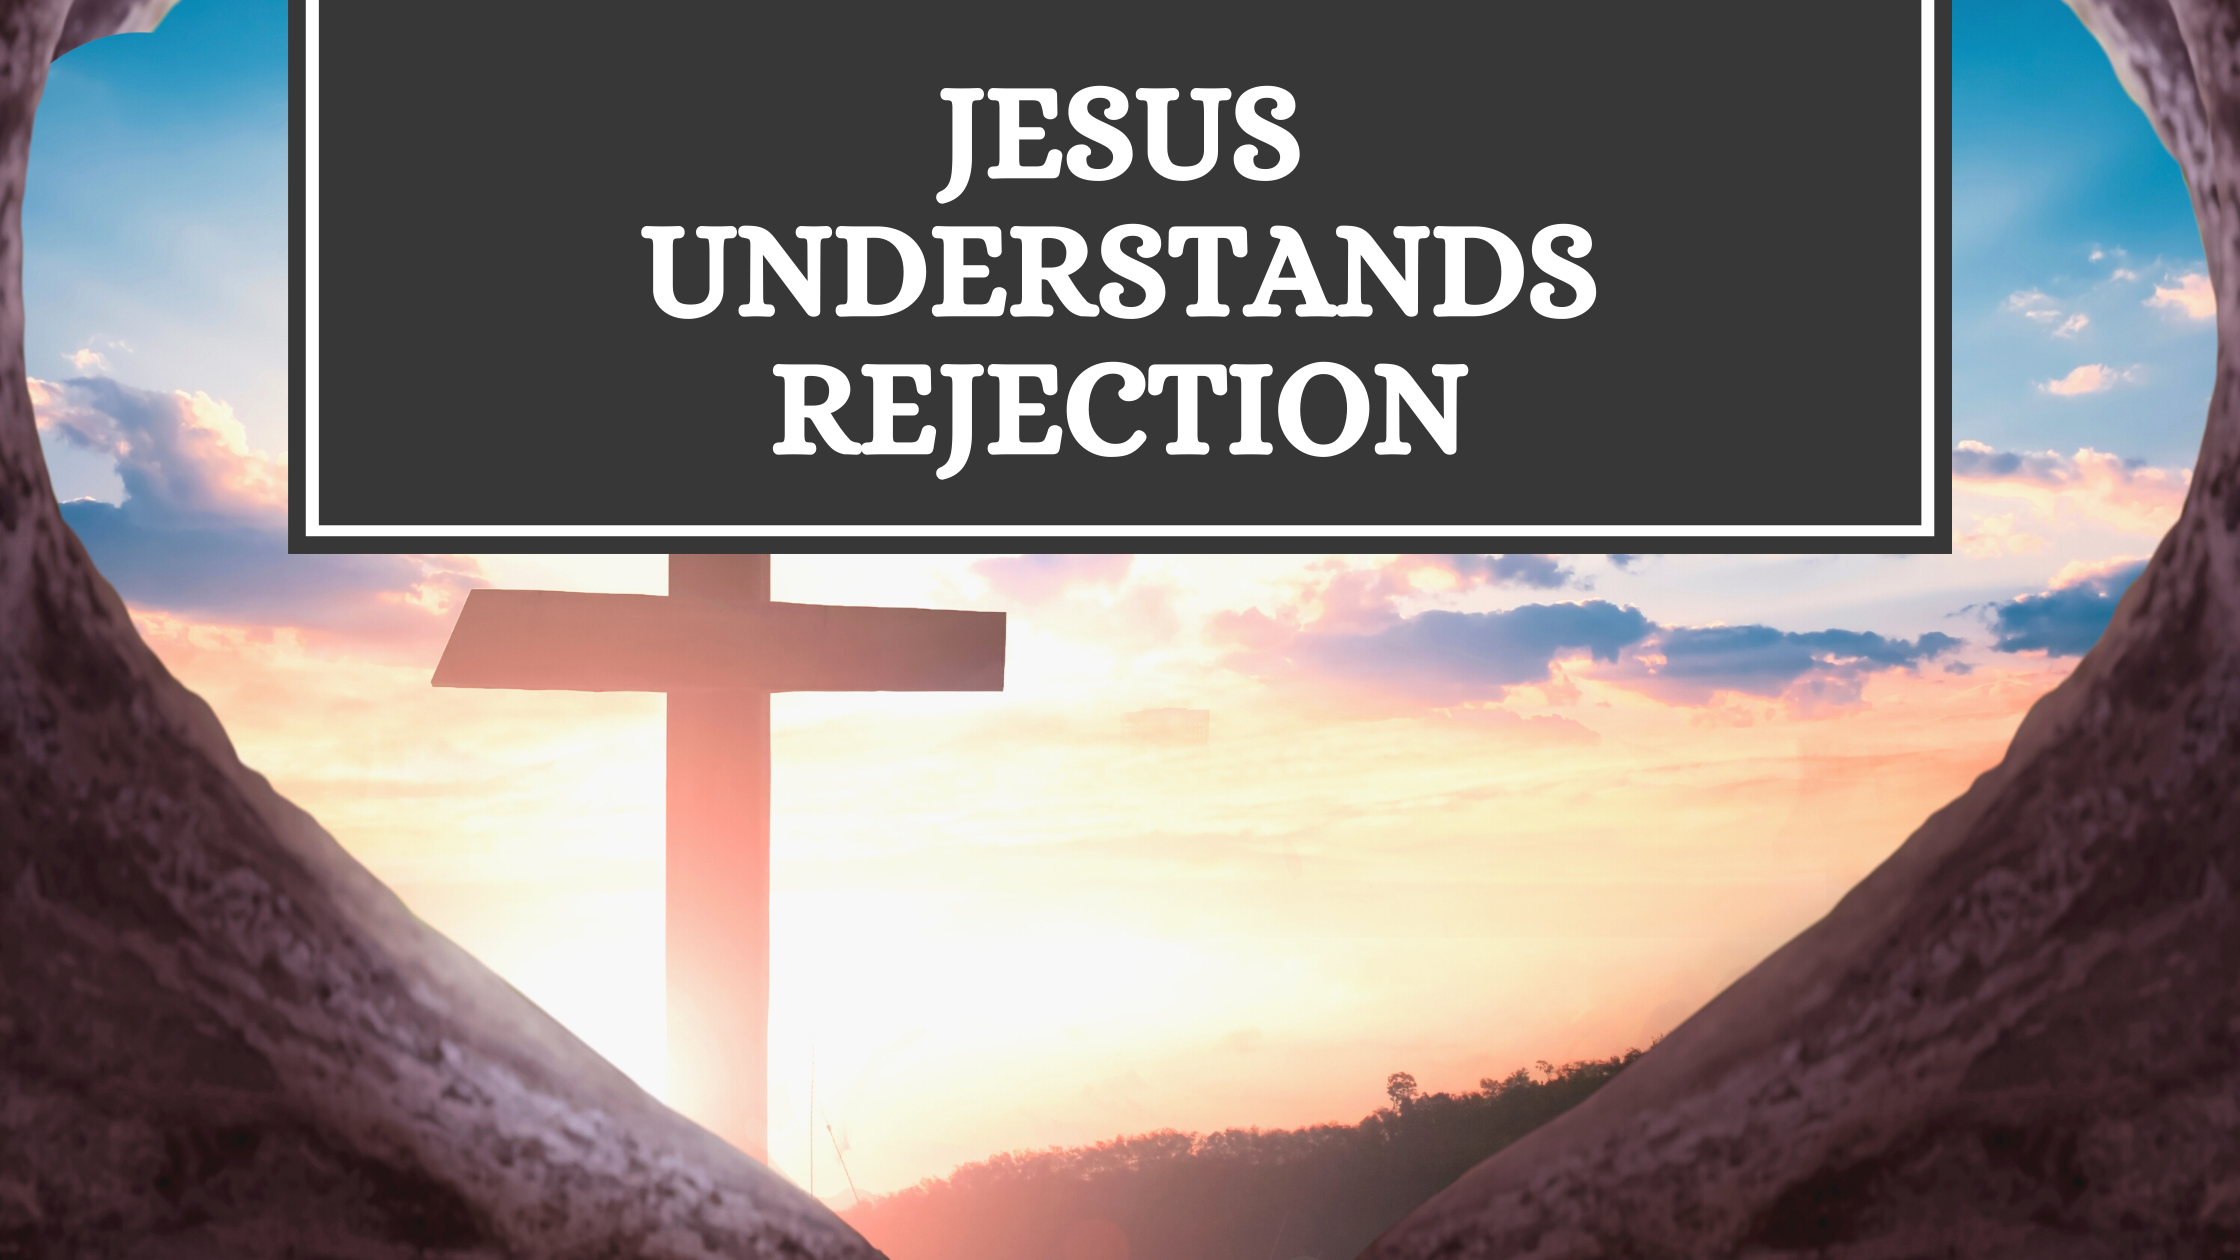 Jesus Understands Rejection blog title with cross background